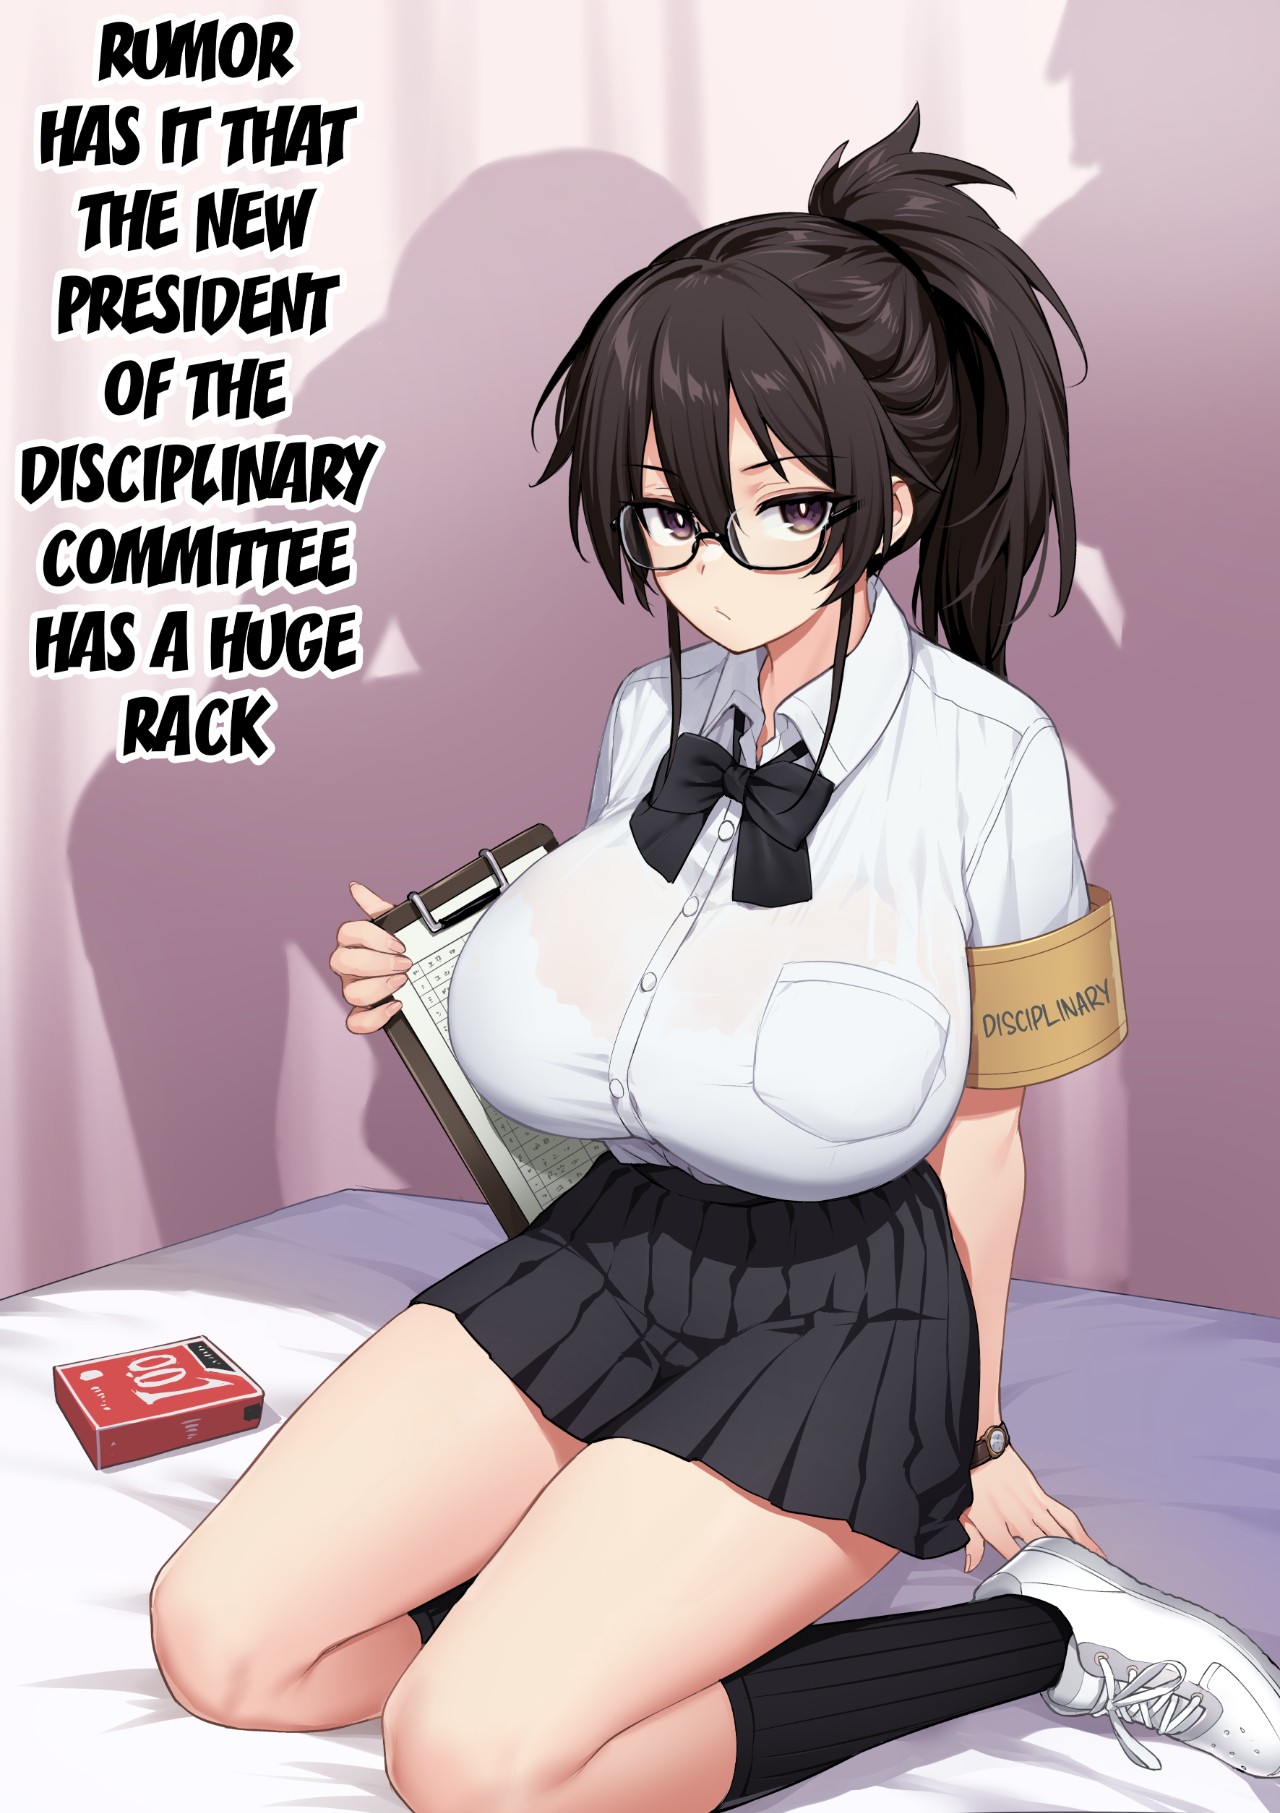 Rumor Has It That The New President Of The Disciplinary Committee Has a Huge Rack Porn Comic english 01